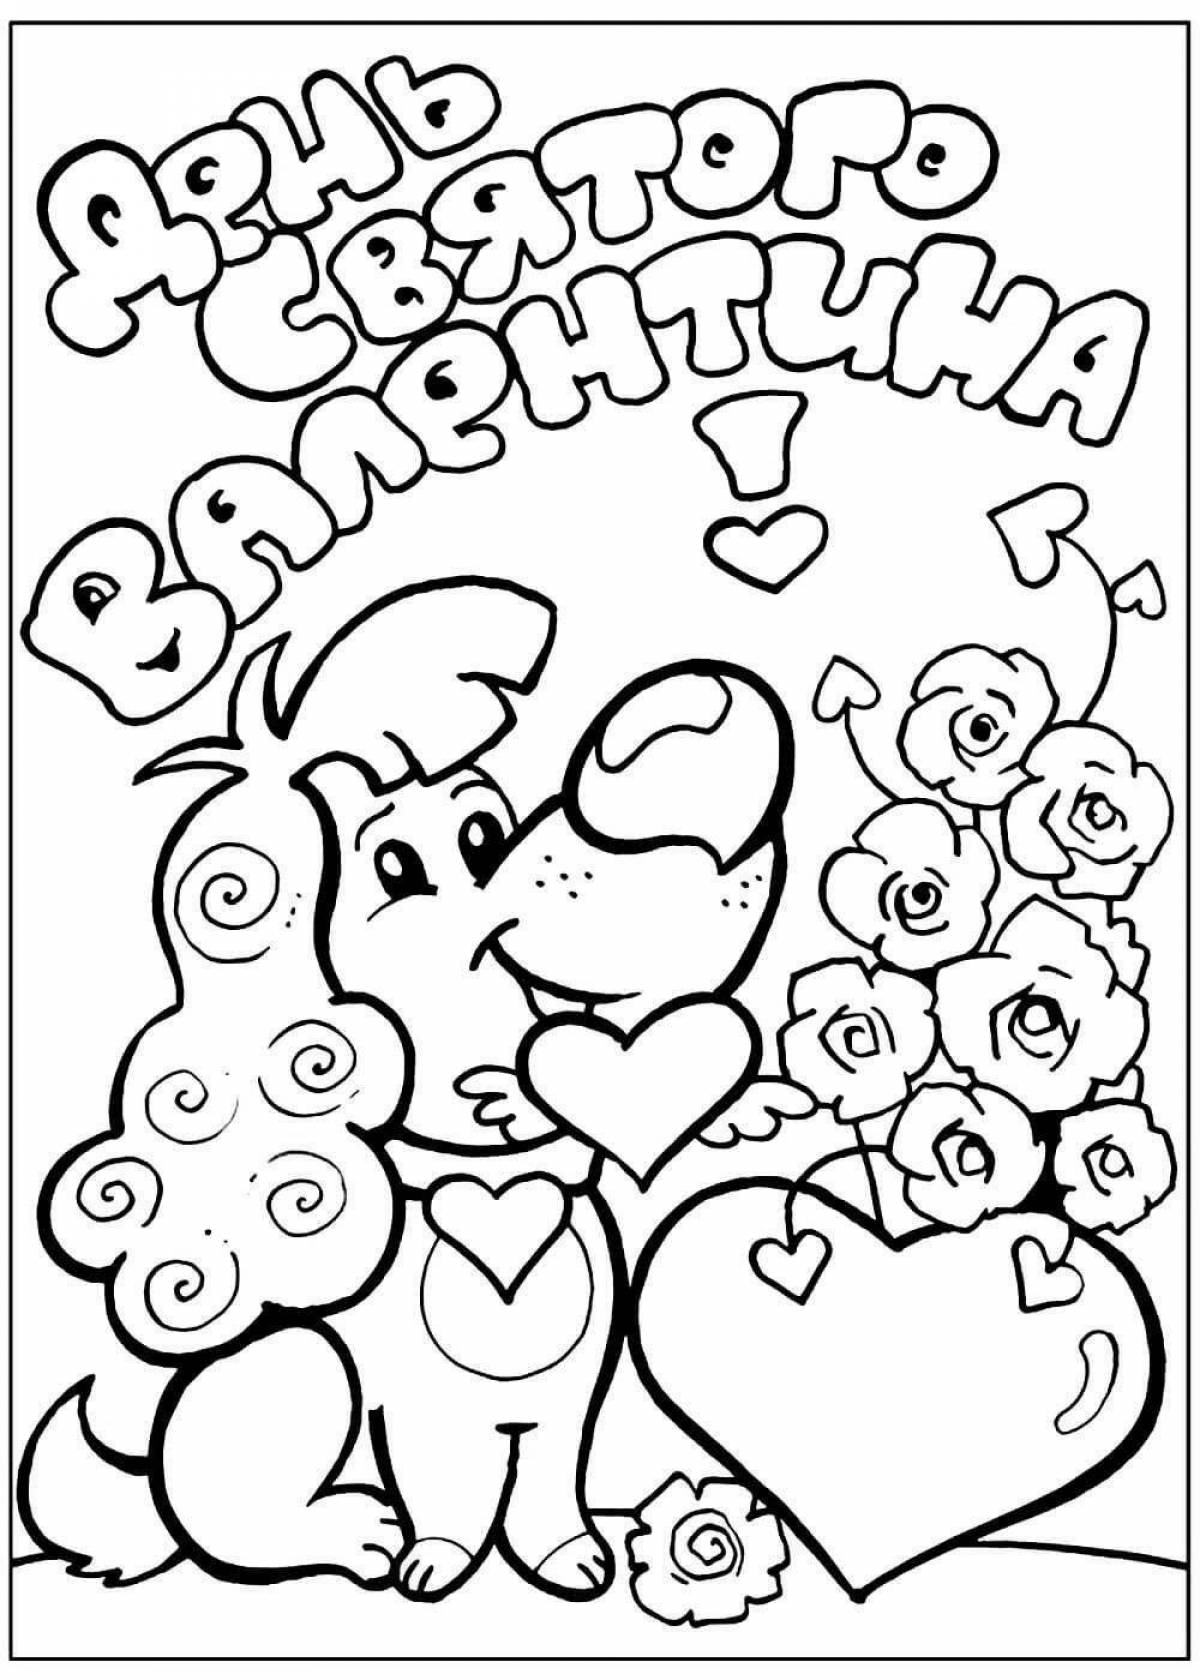 Adorable valentine's day coloring book for kids